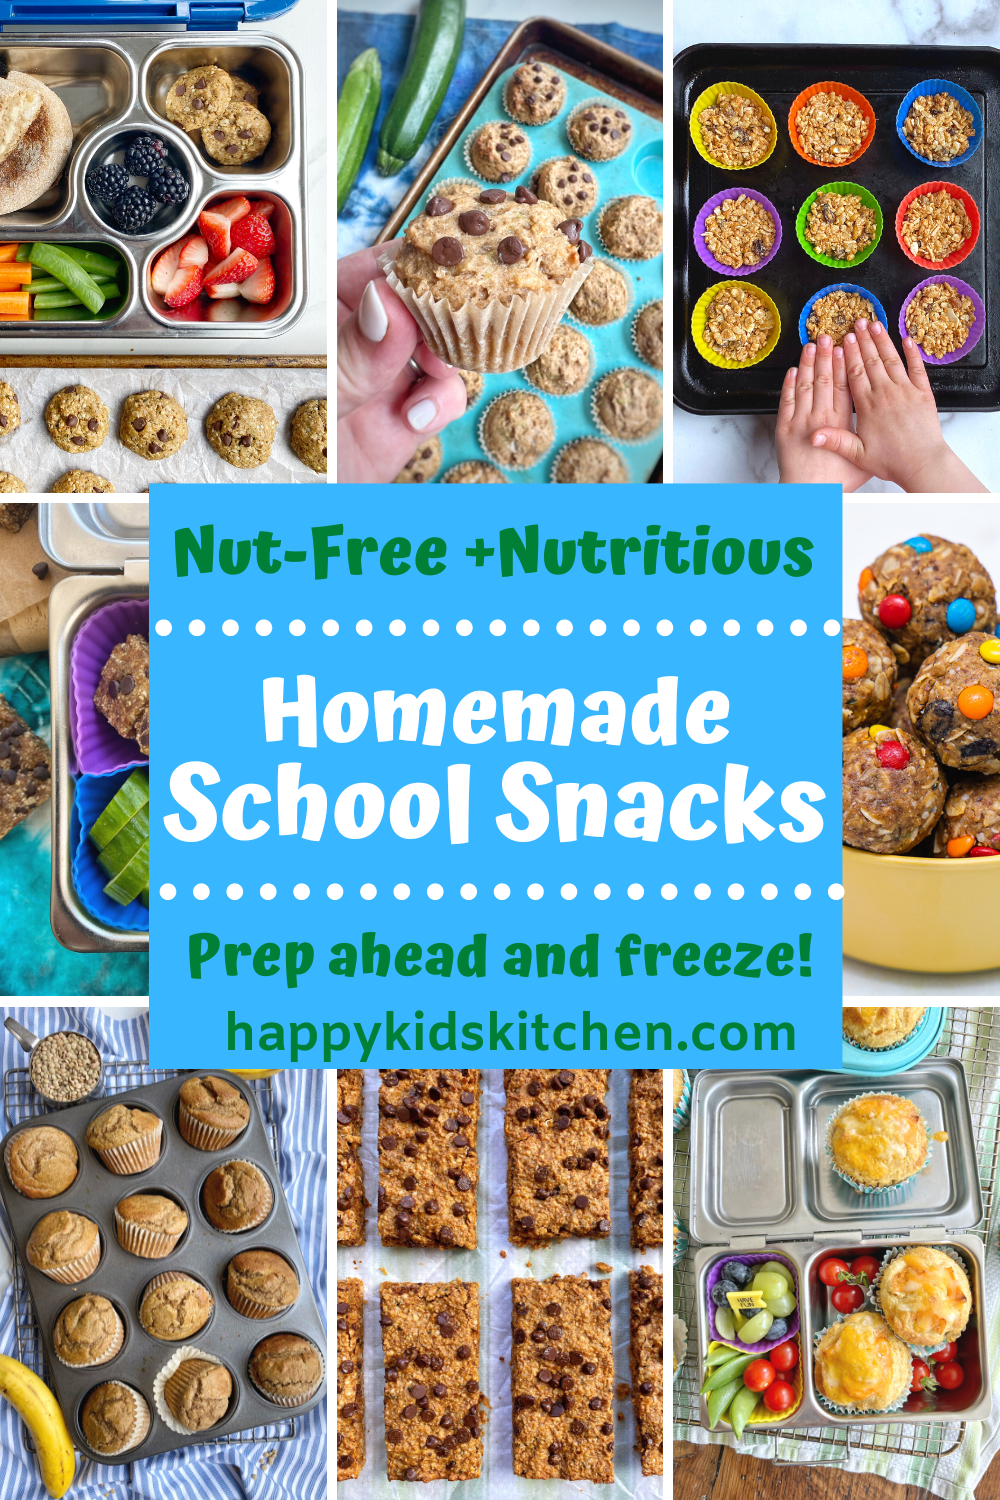 Junk Free Snack Box Recipes for kids(School/Day care) - Kitchen Kathukutty